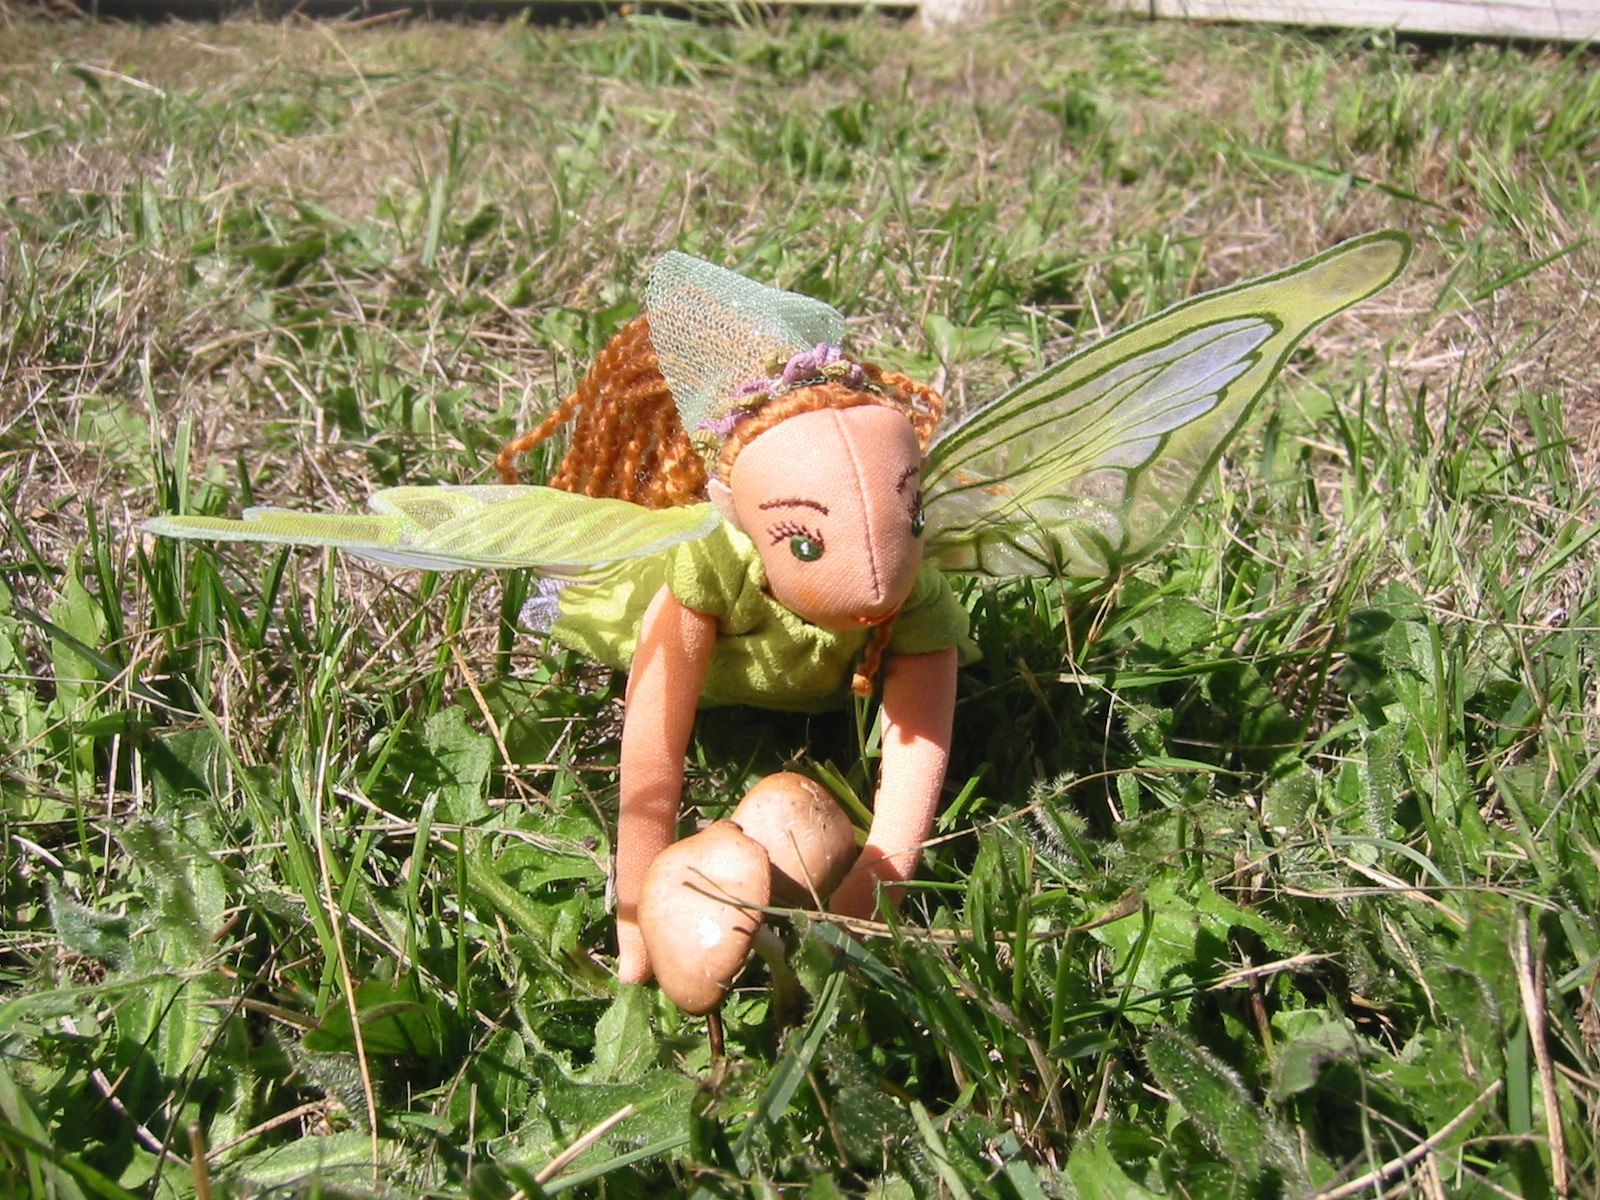 the green fairy doll sits in grass and looks like it is looking around